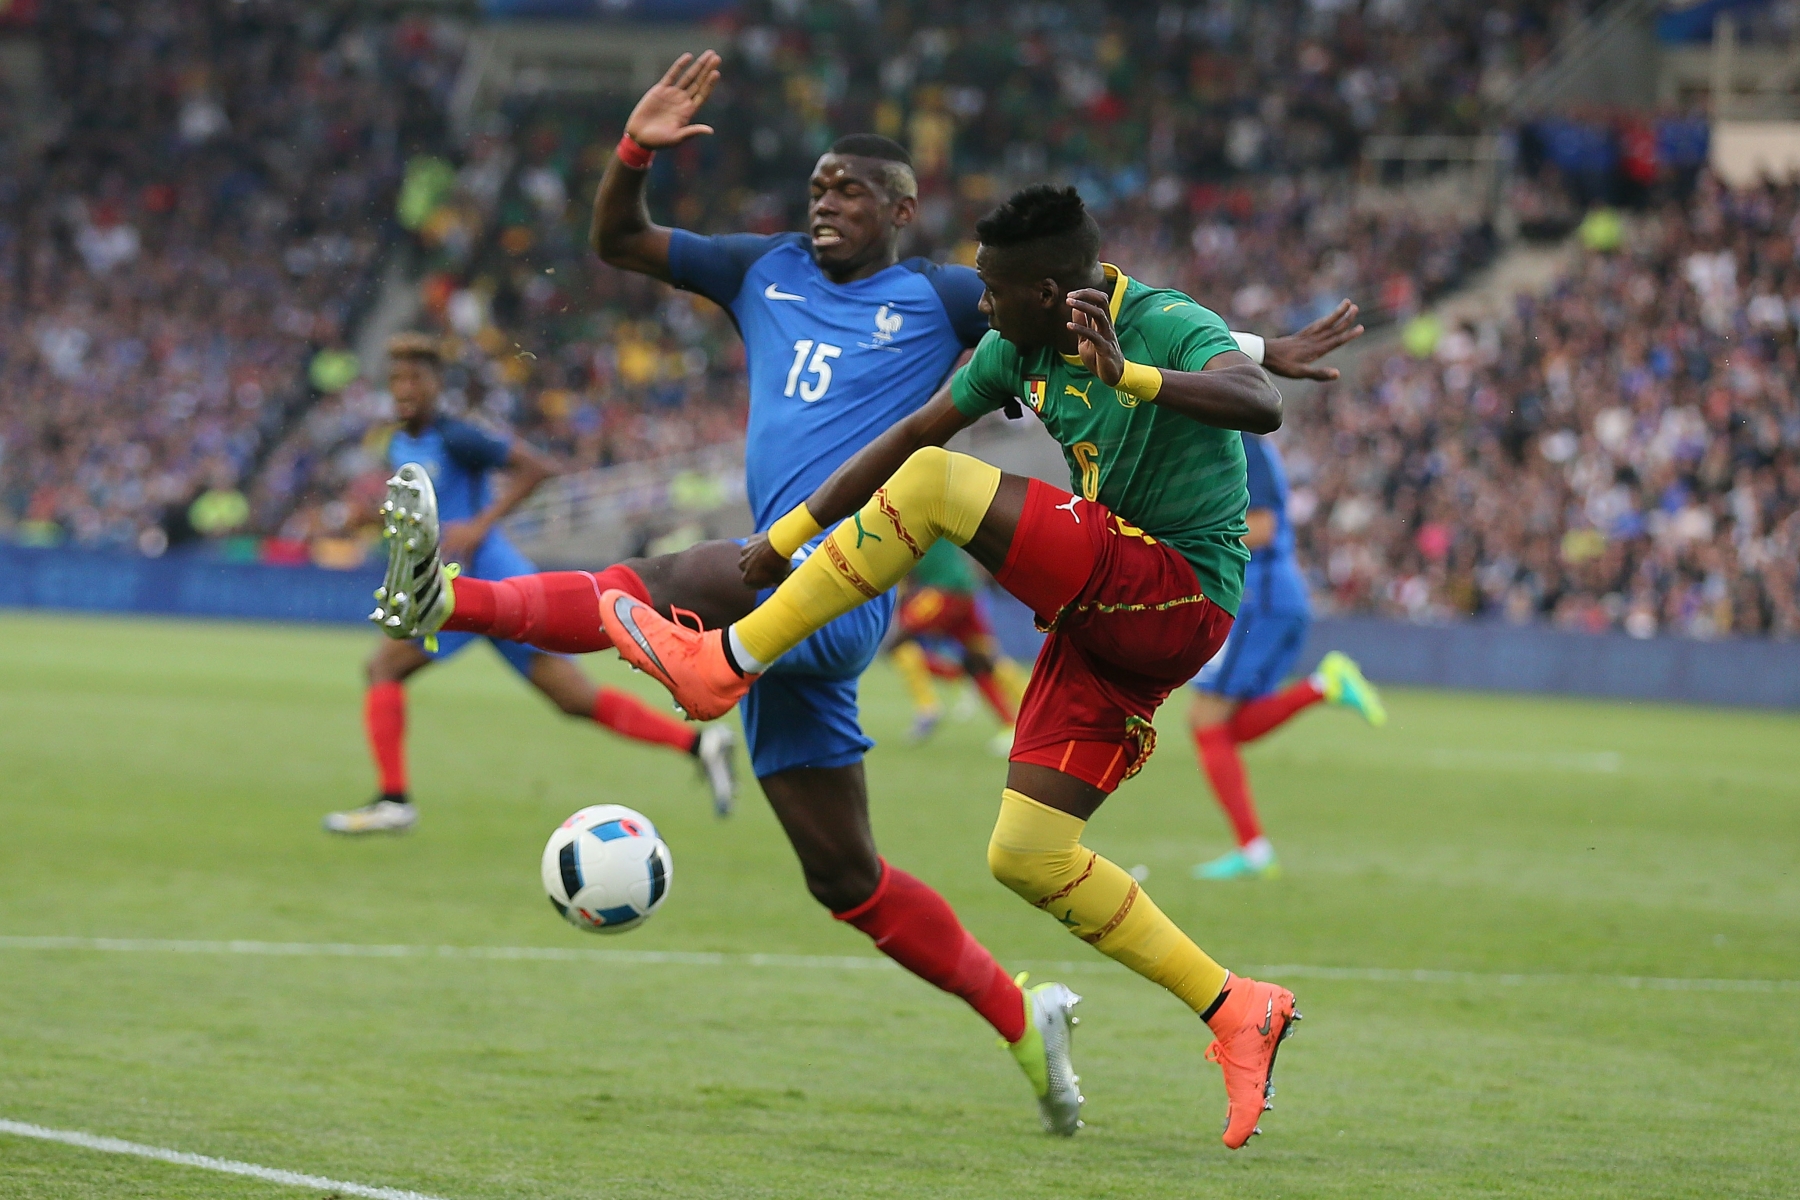 Cameroon's Ambroise Oyongo Bitolo, right, challenges for the ball with France's Paul Pogba during a friendly soccer match between France and Cameroon at the La Beaujoire Stadium in Nantes, western France, Monday, May 30, 2016. The French squad is in preparation for the EURO 2016 soccer championships which start on June 10, 2016. (AP Photo/David Vincent) France Cameroon Soccer